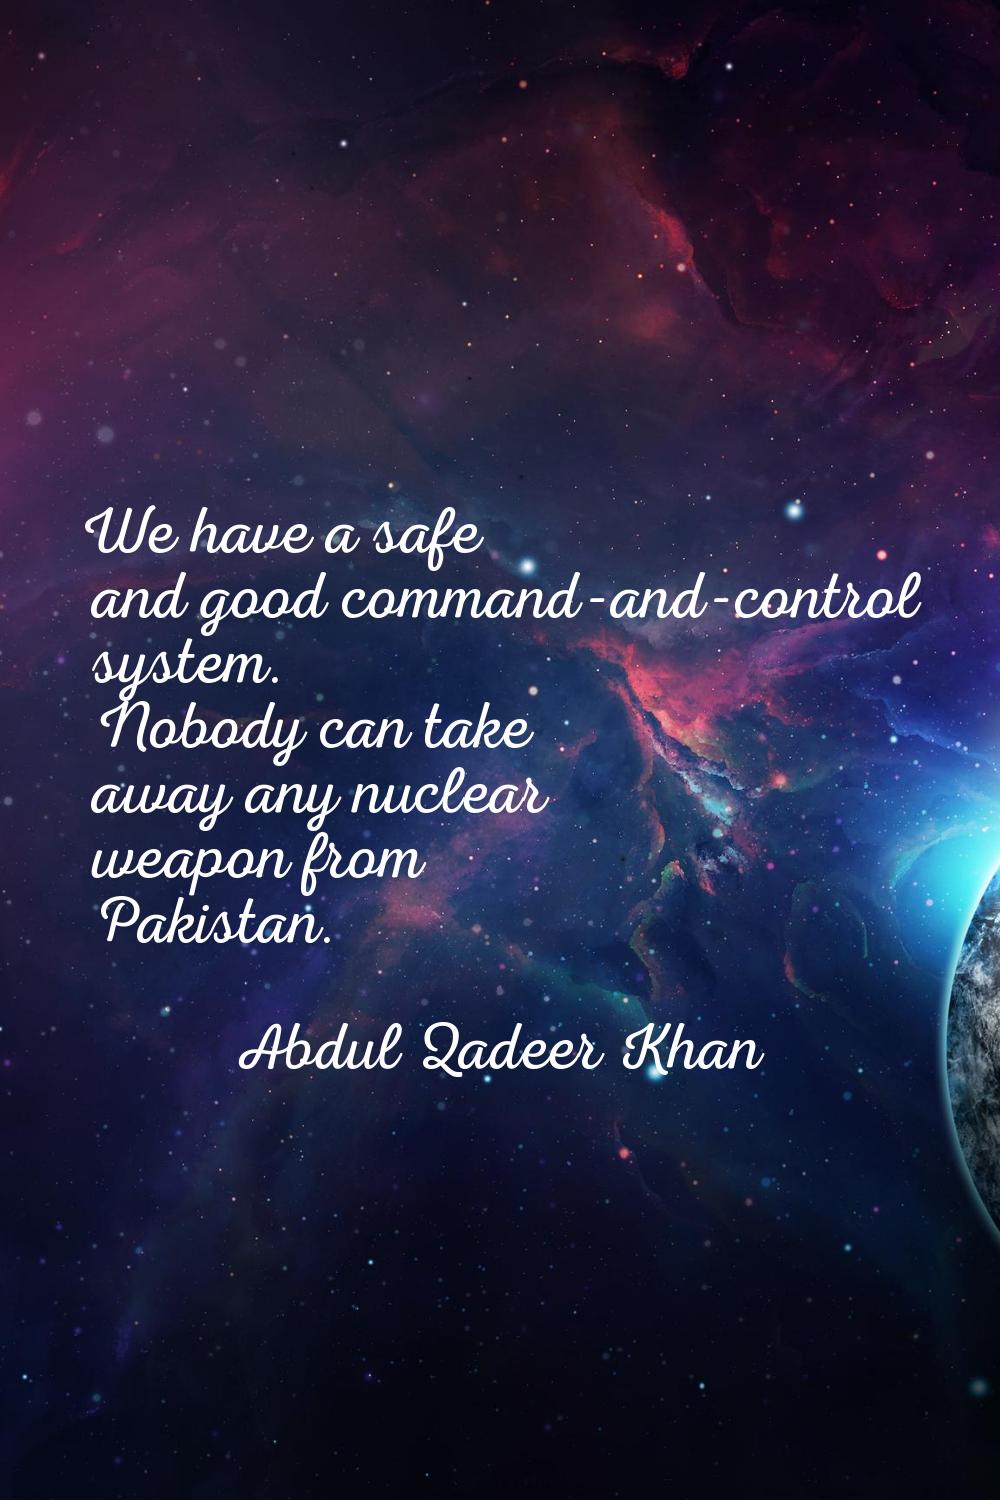 We have a safe and good command-and-control system. Nobody can take away any nuclear weapon from Pa